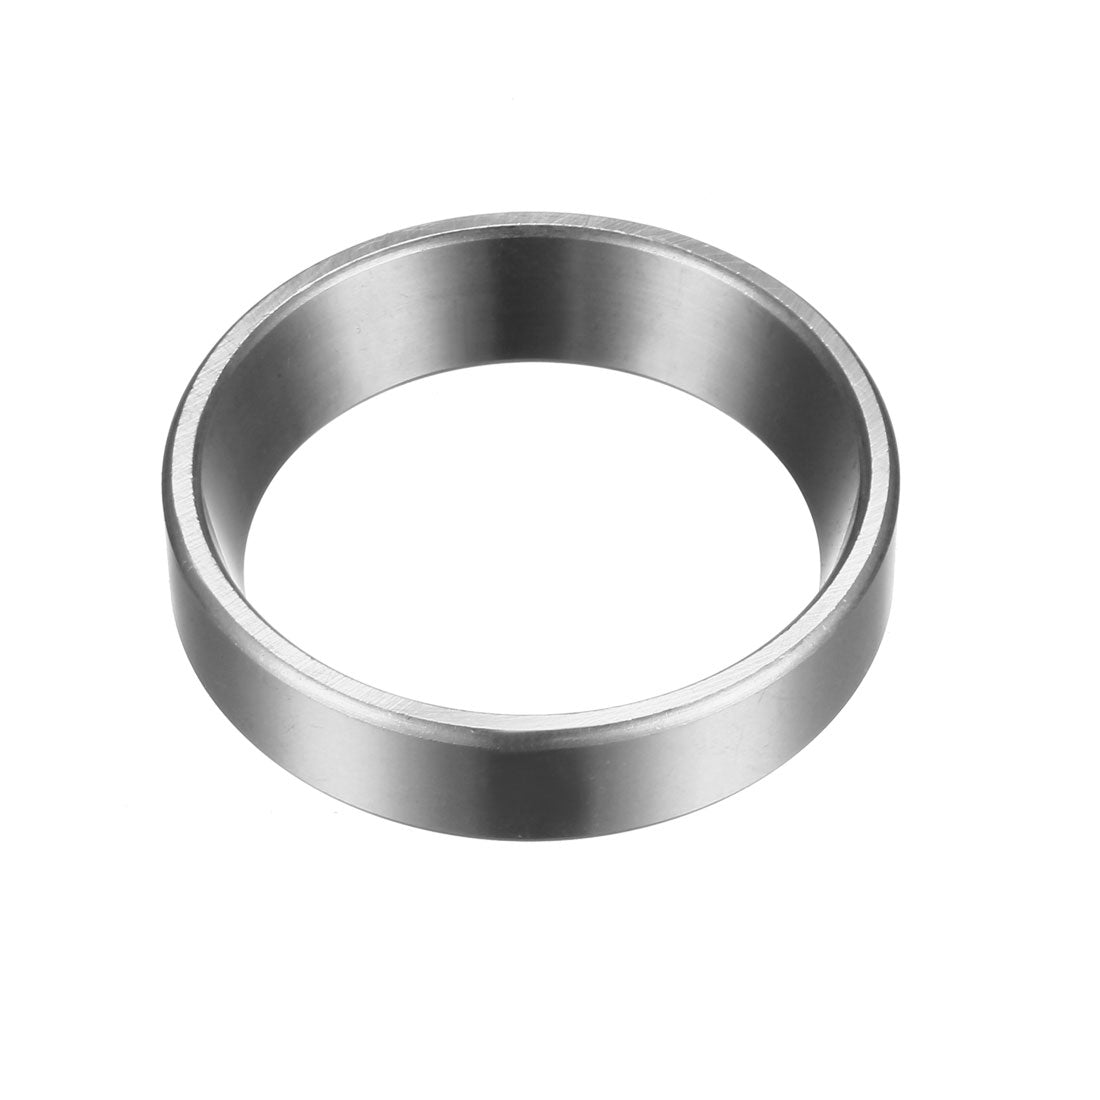 Uxcell Uxcell 13836 Tapered Roller Bearing Outer Race Cup 2.5625" O.D., 0.375" Width